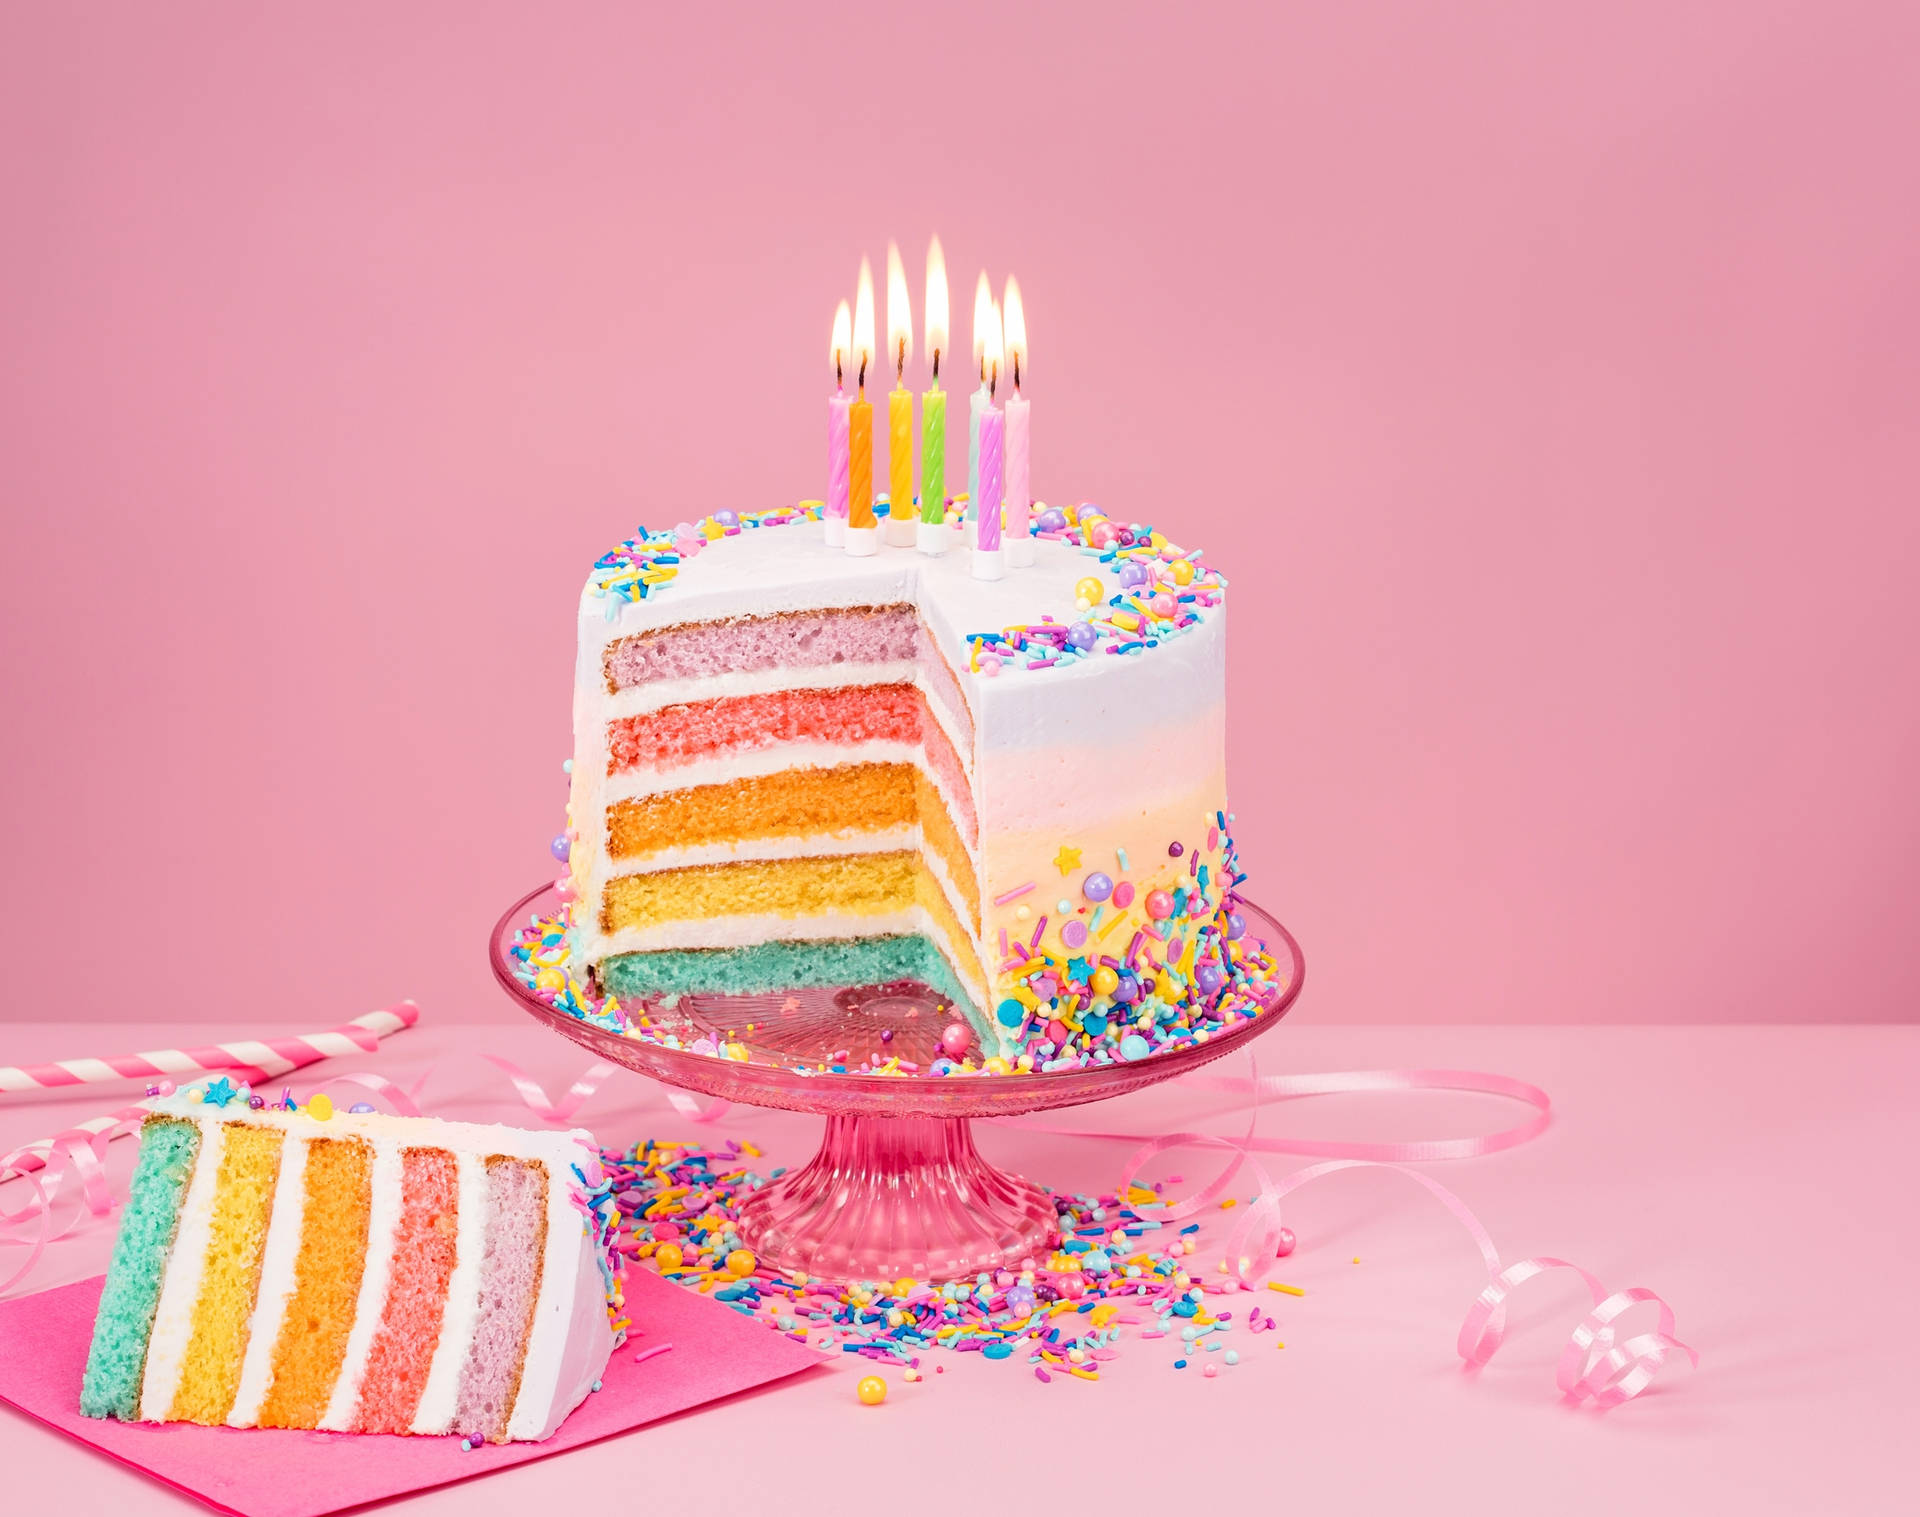 Caption: Glamorous Pastel Birthday Cake with Candles Wallpaper